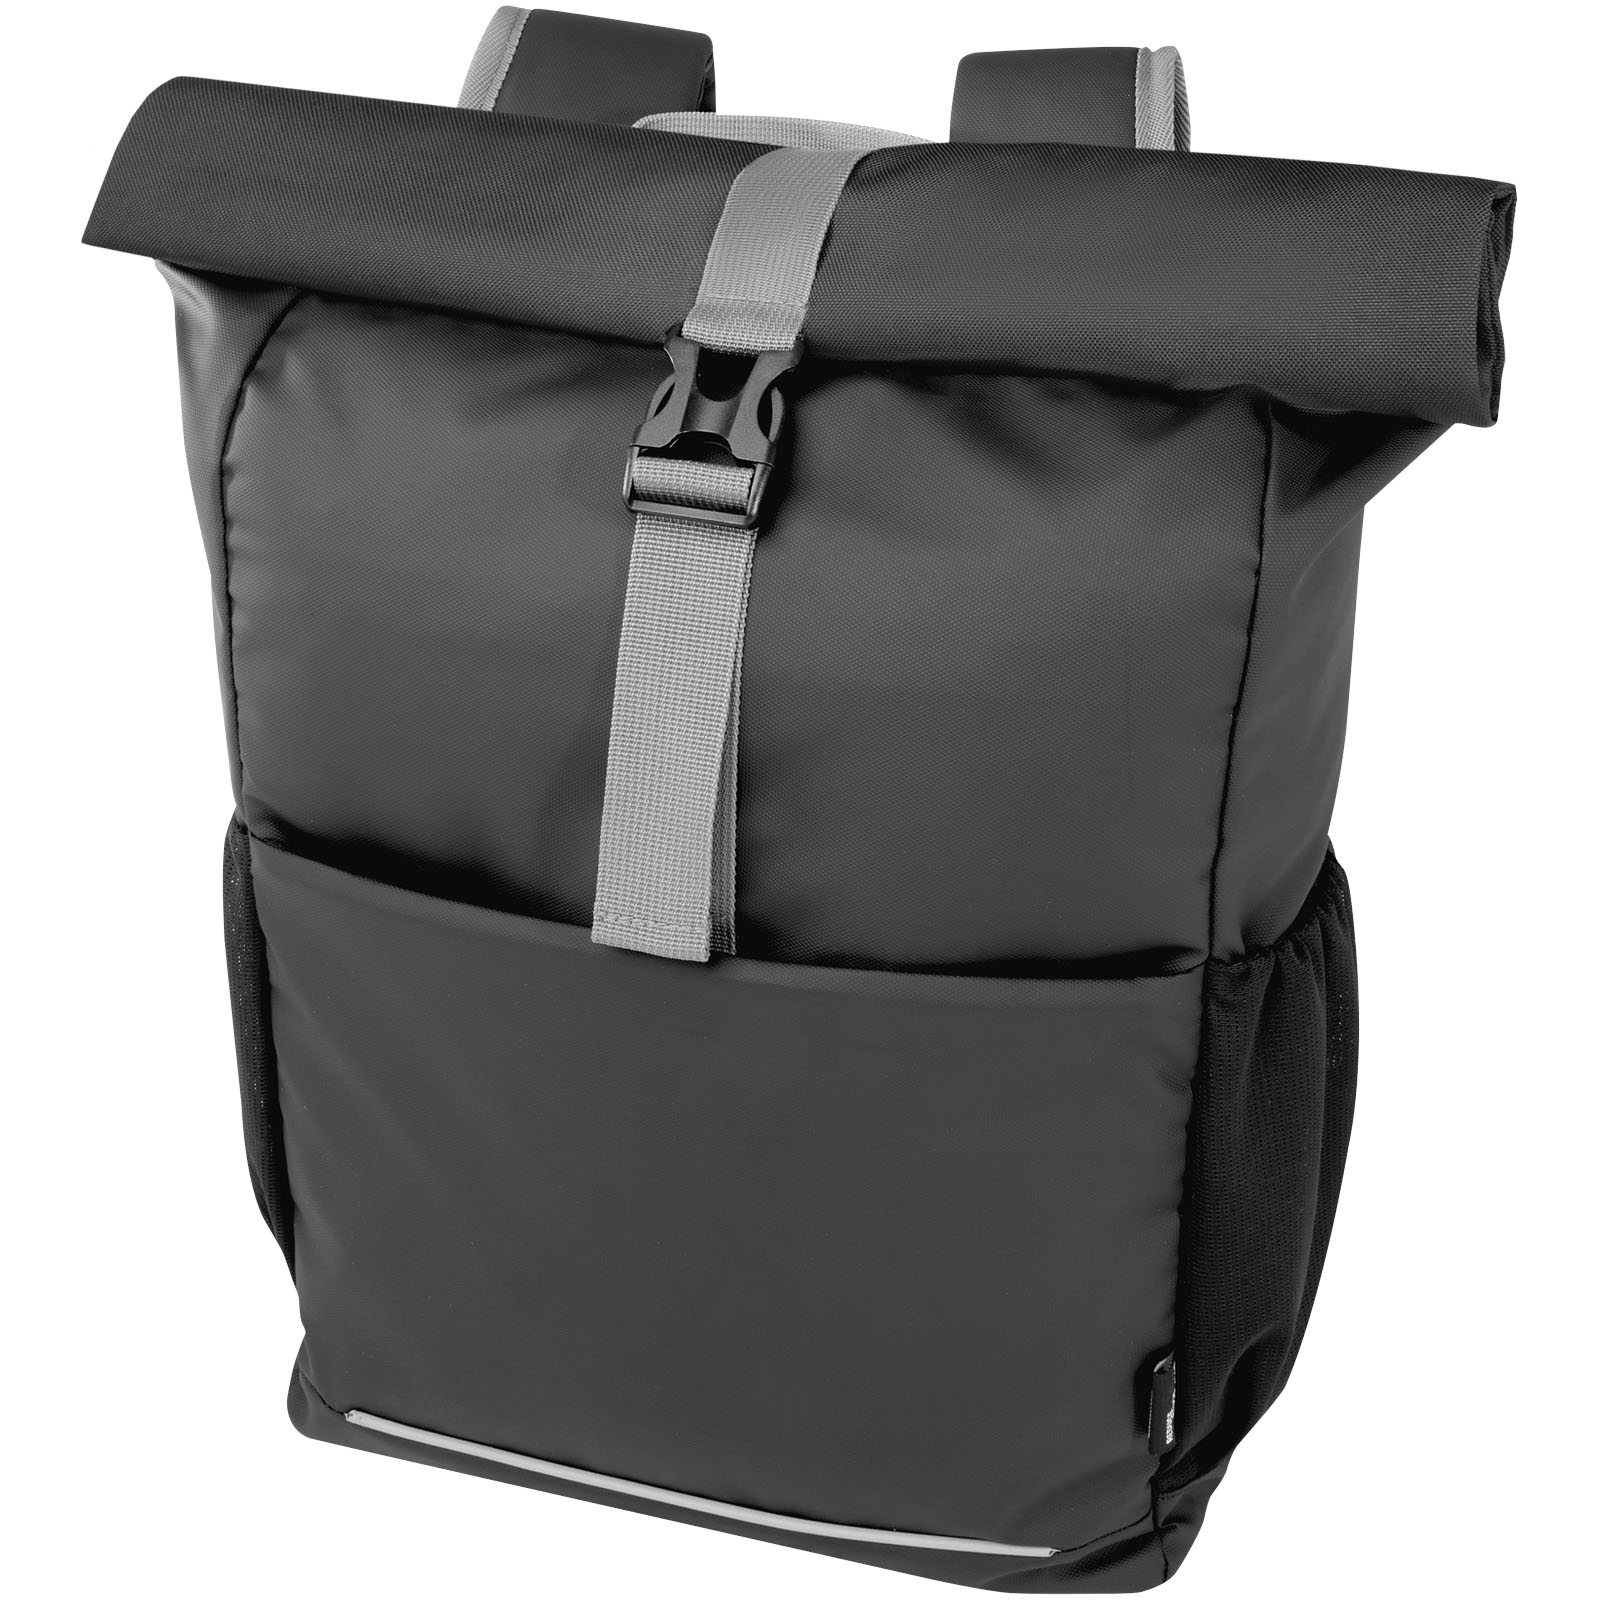 Aqua 15" GRS recycled water resistant roll-top bike bag 20L - Sutton-in-Ashfield